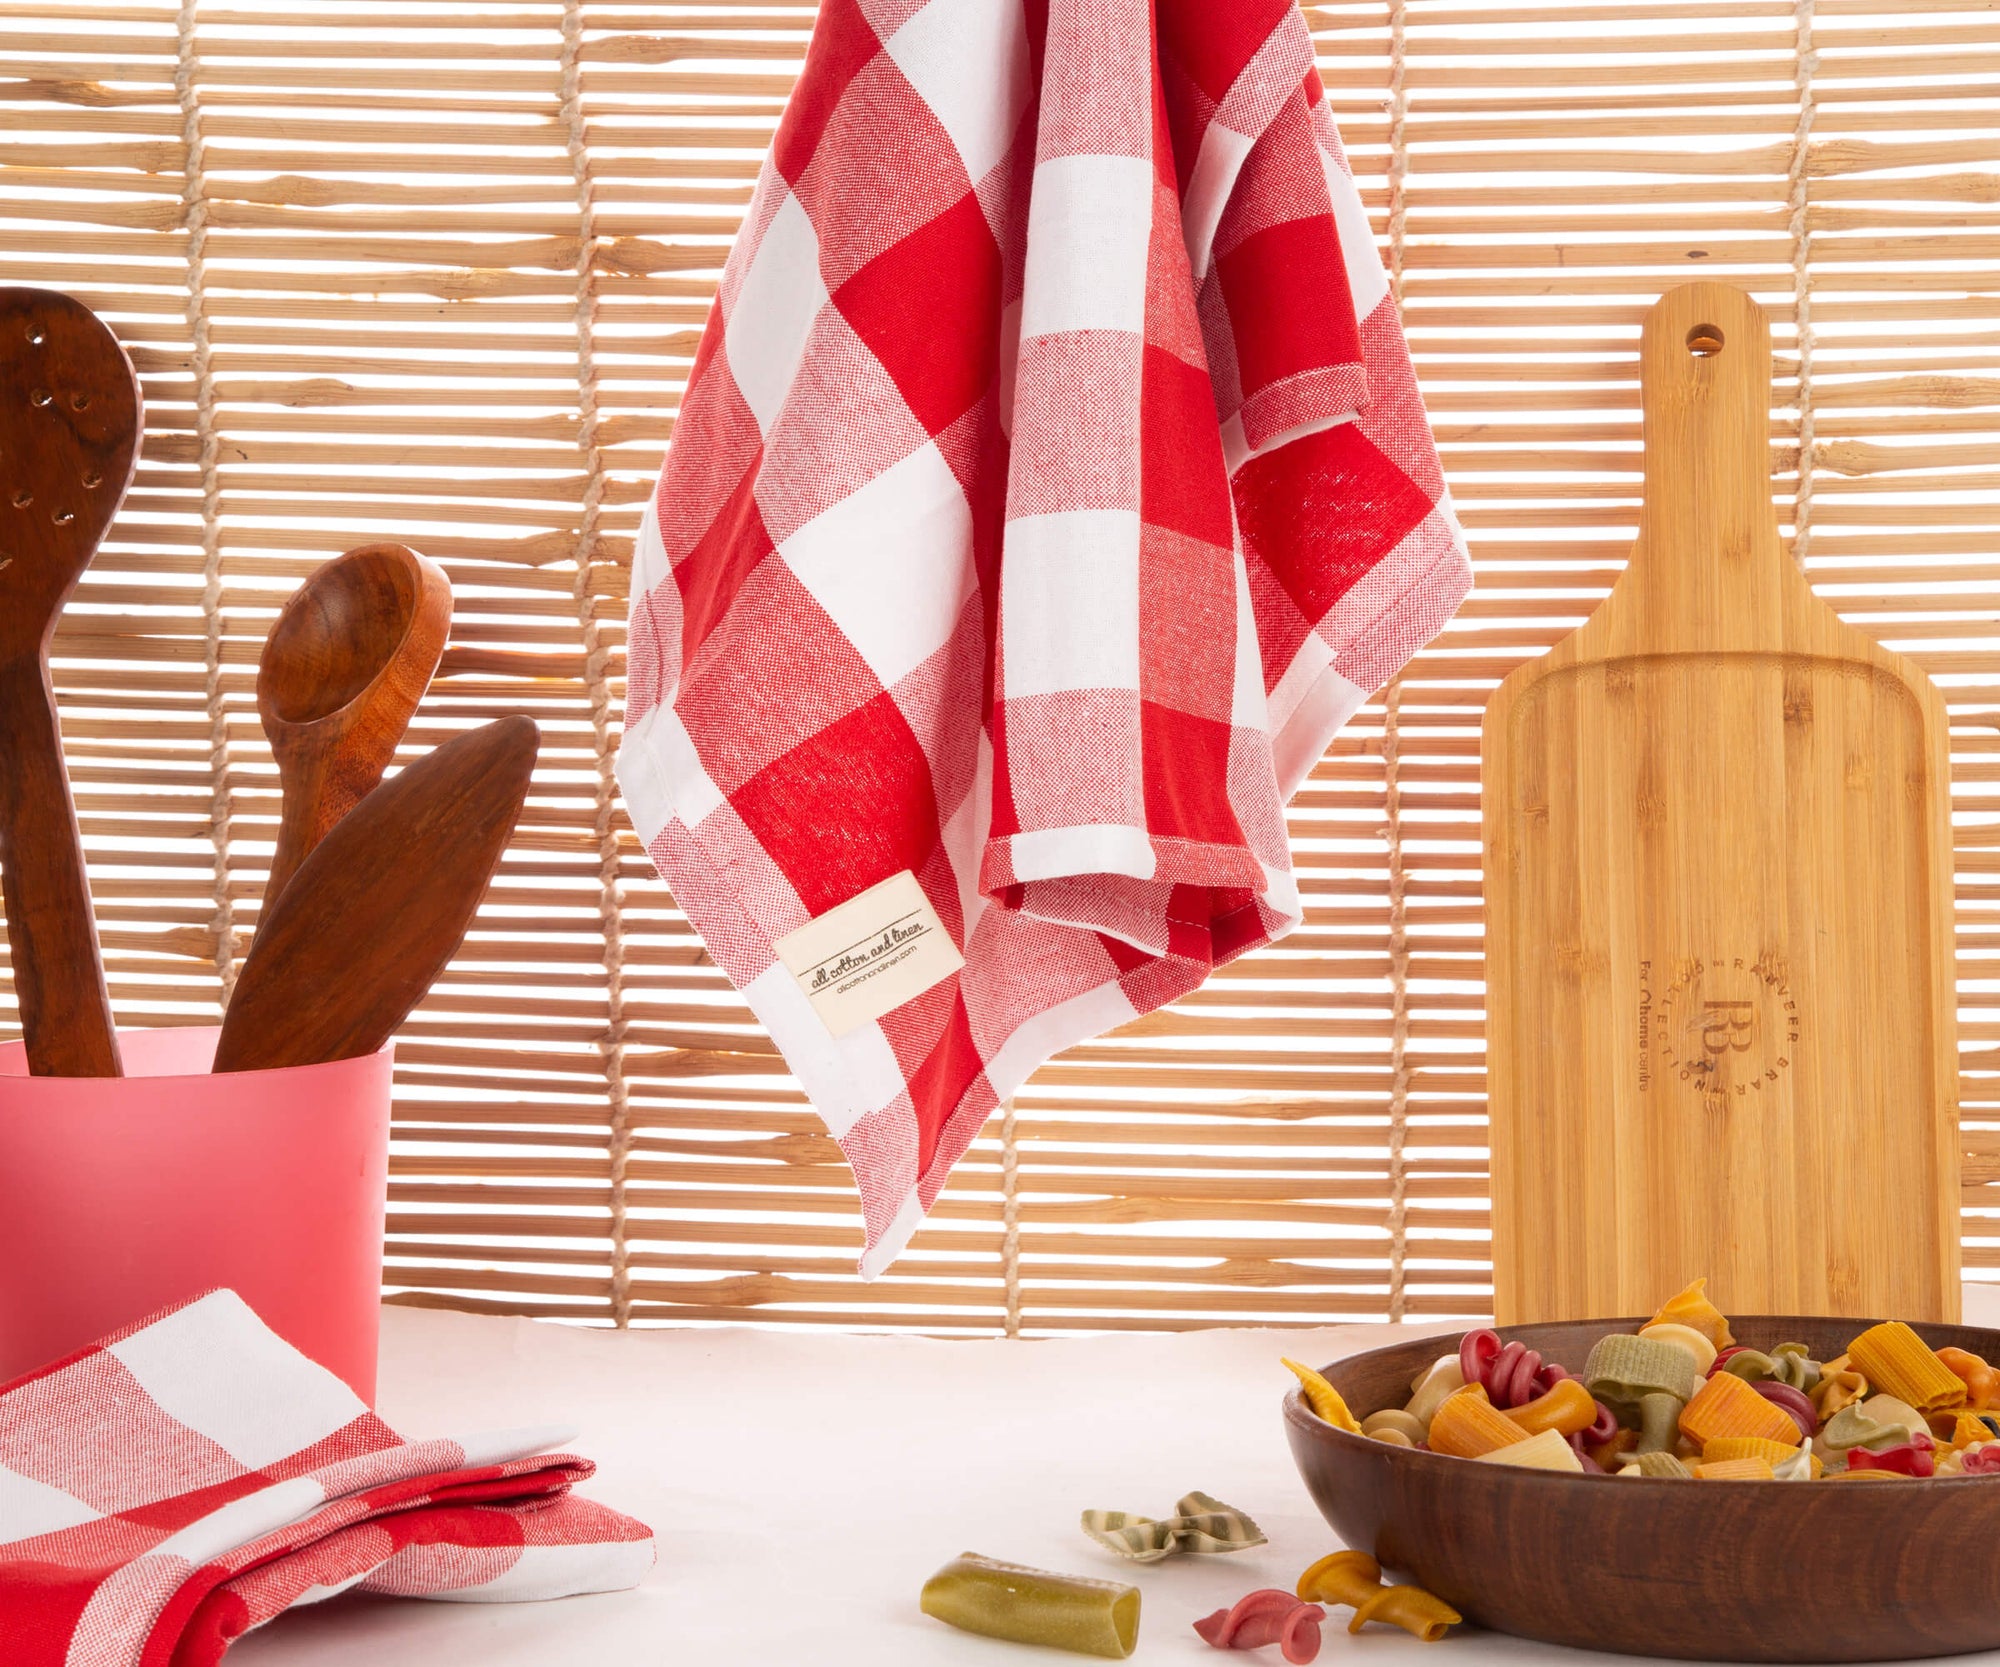 How to hang kitchen towels?